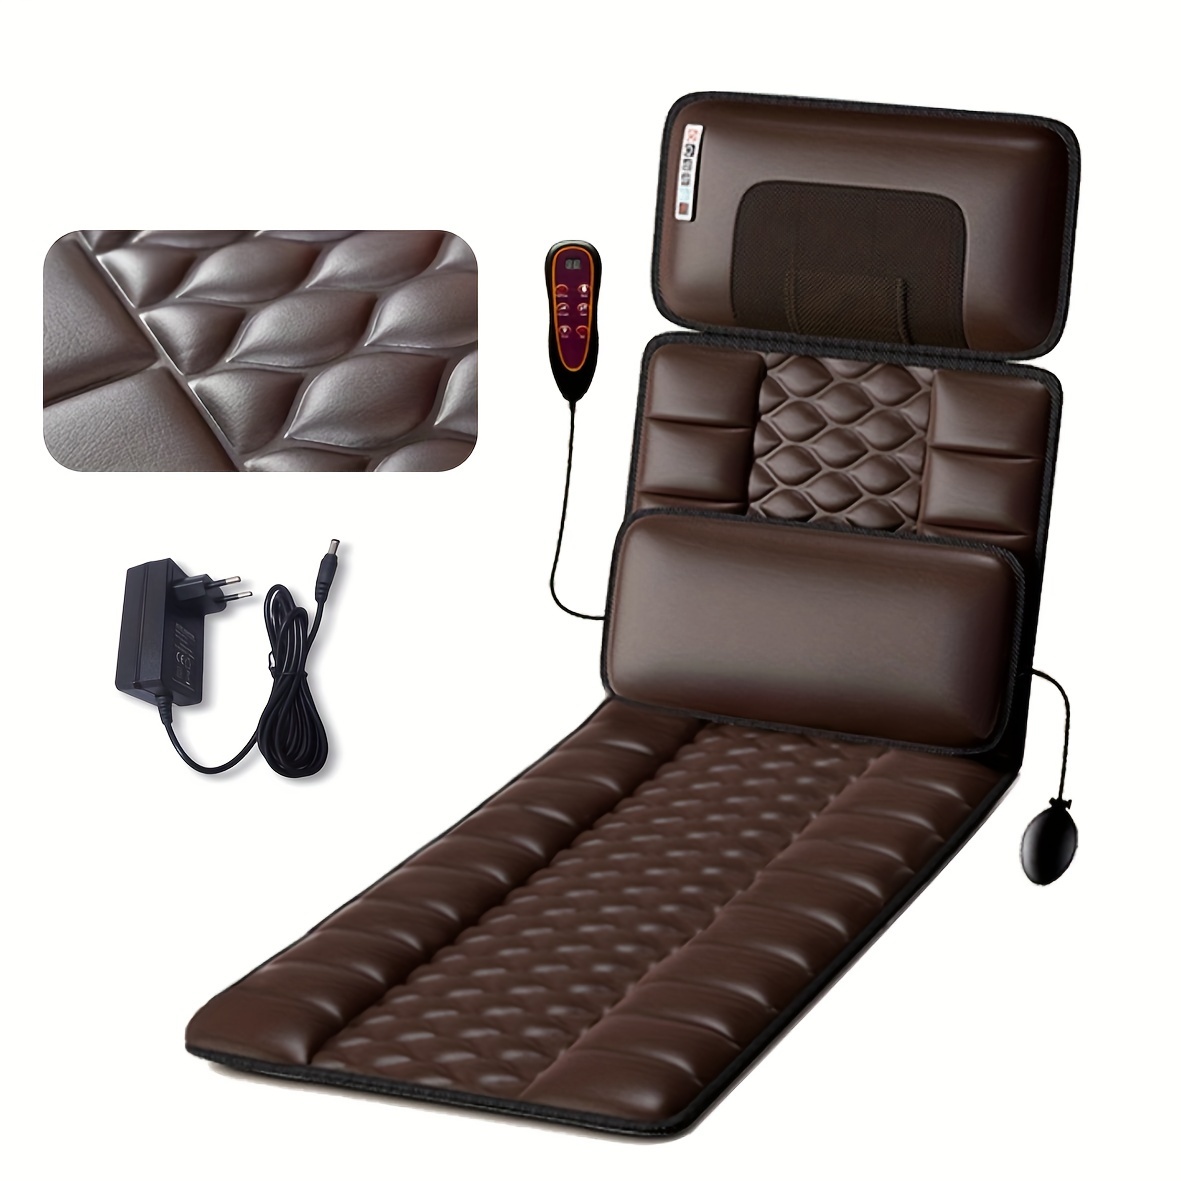 

Full Body Massage Mat With Neck Pressure, 10-zone Vibration, And Waist Hot Compress, Pu Leather Diamond Pattern, European Standard Plug, 220v Plug Powered For Whole Body Relaxation Without Battery